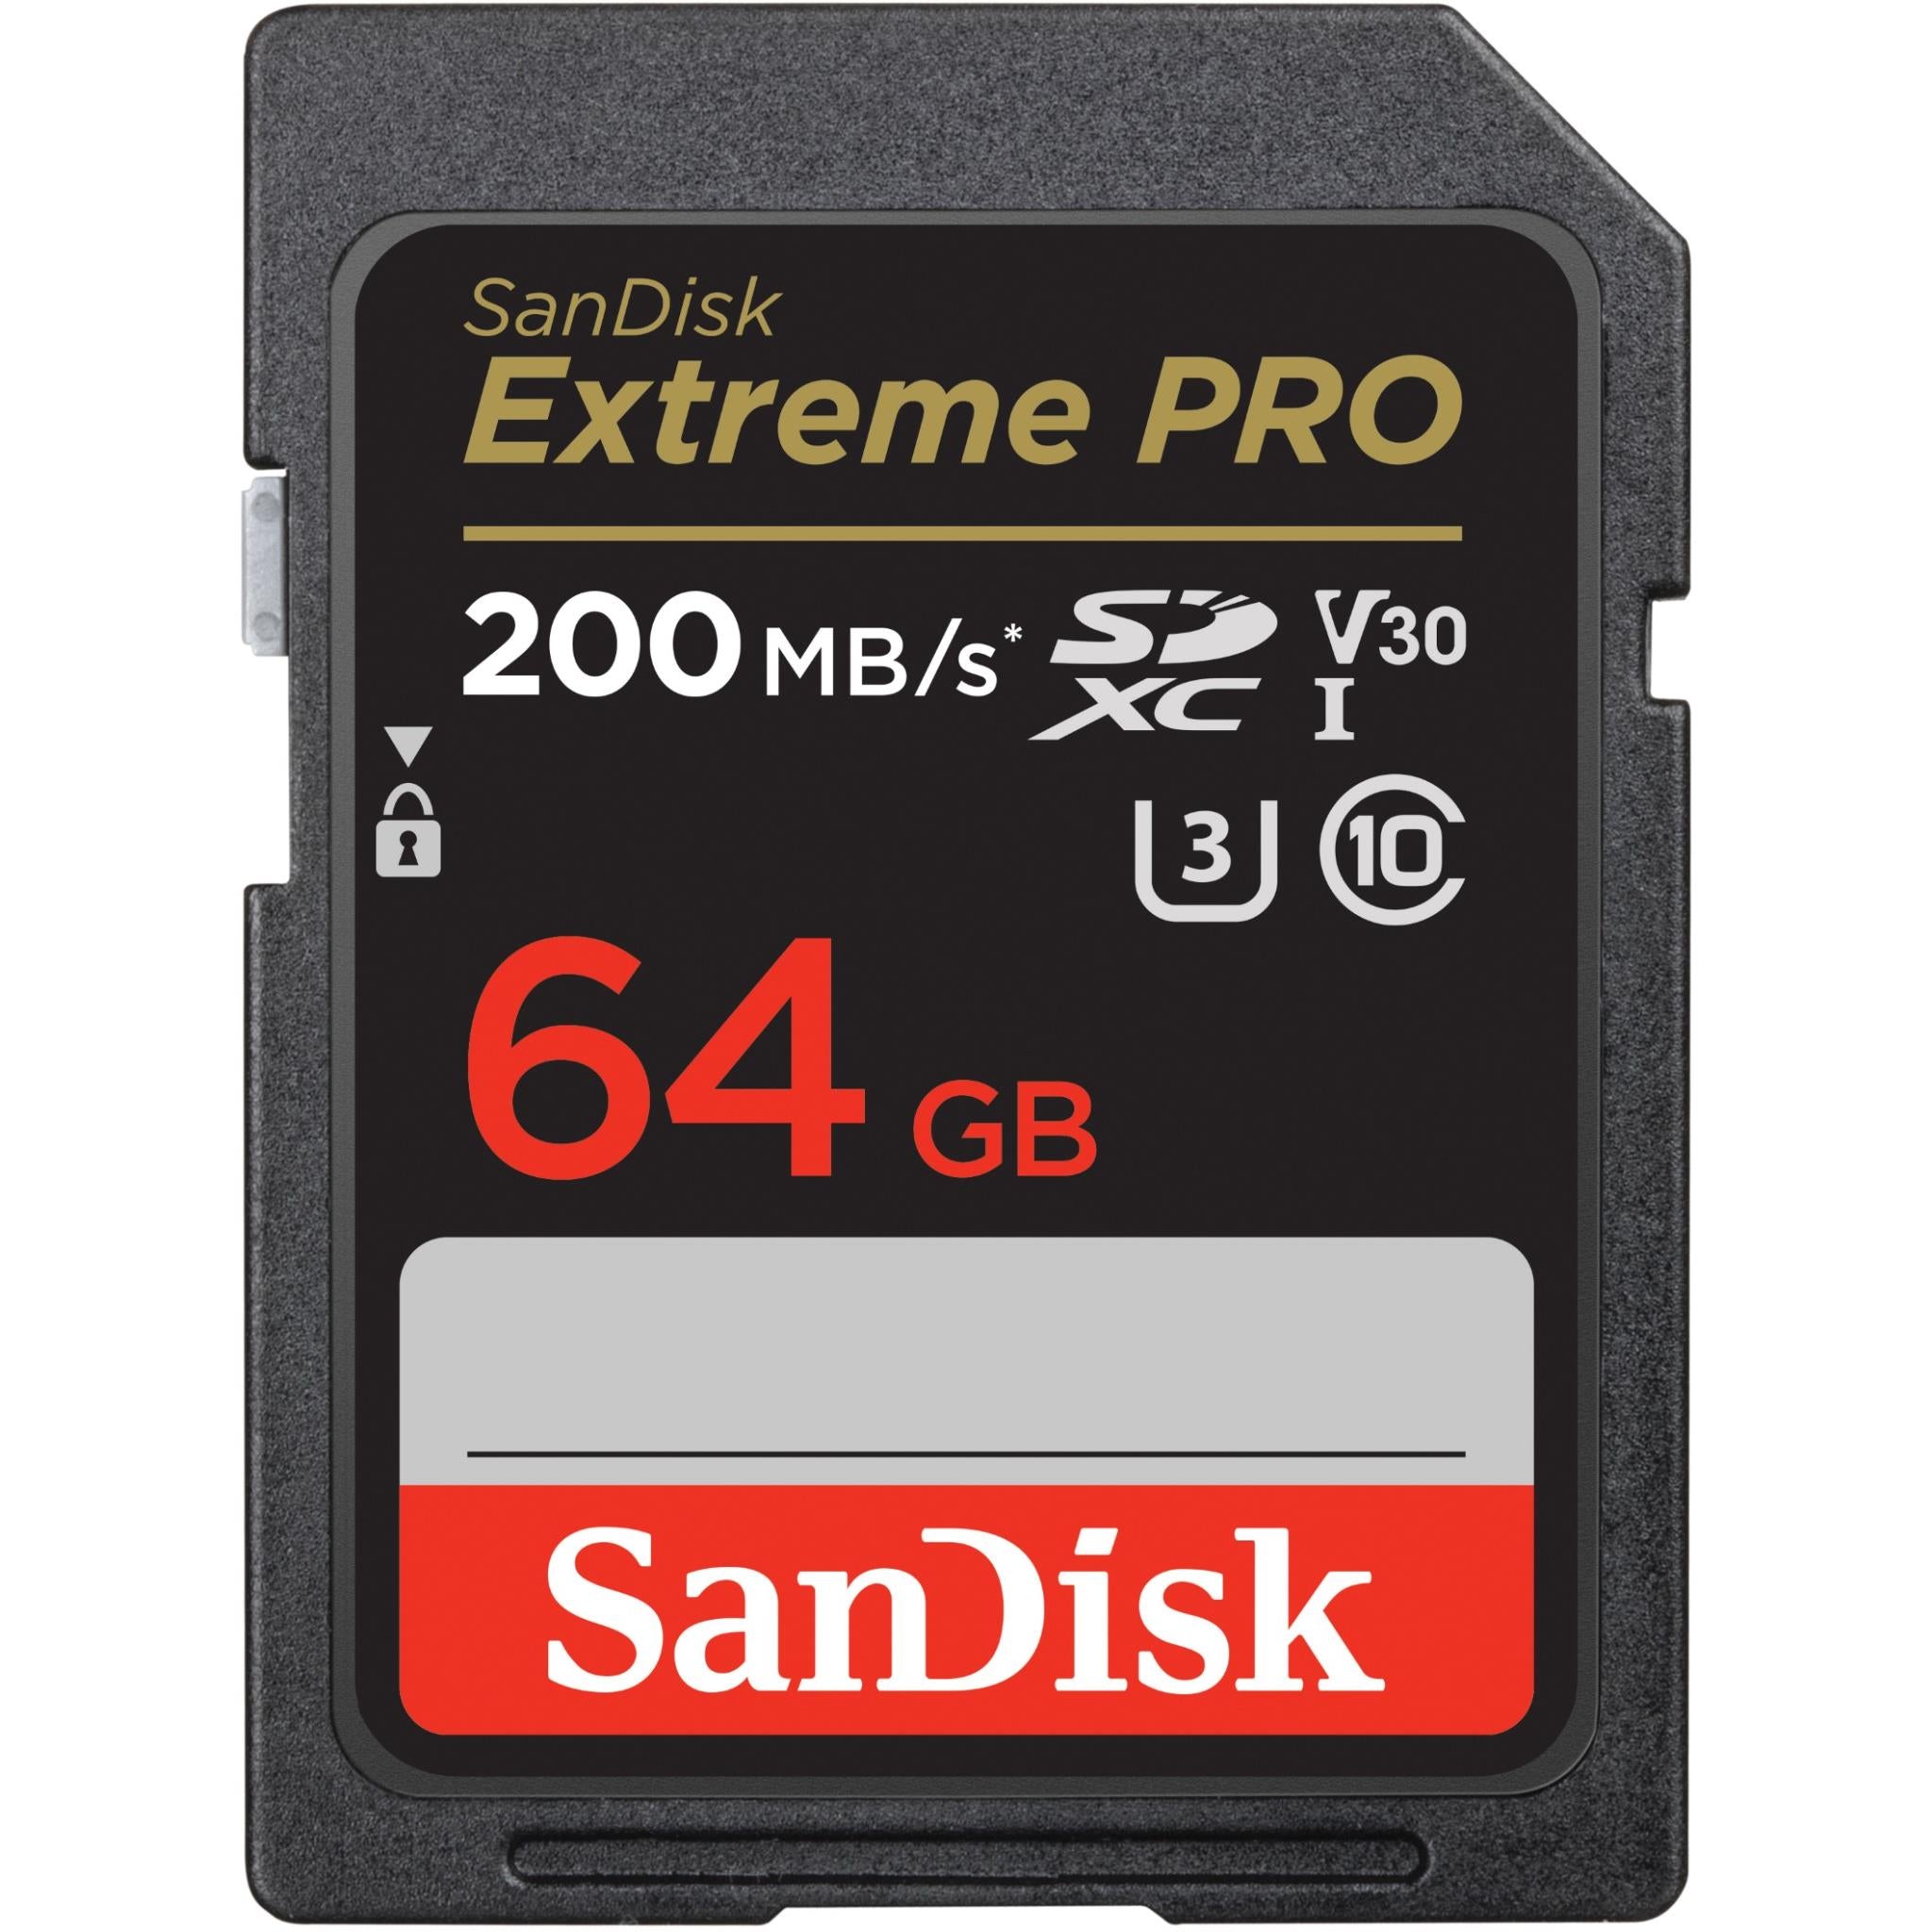 sandisk extreme pro sdxc 64gb 200mb/s memory card [2022]